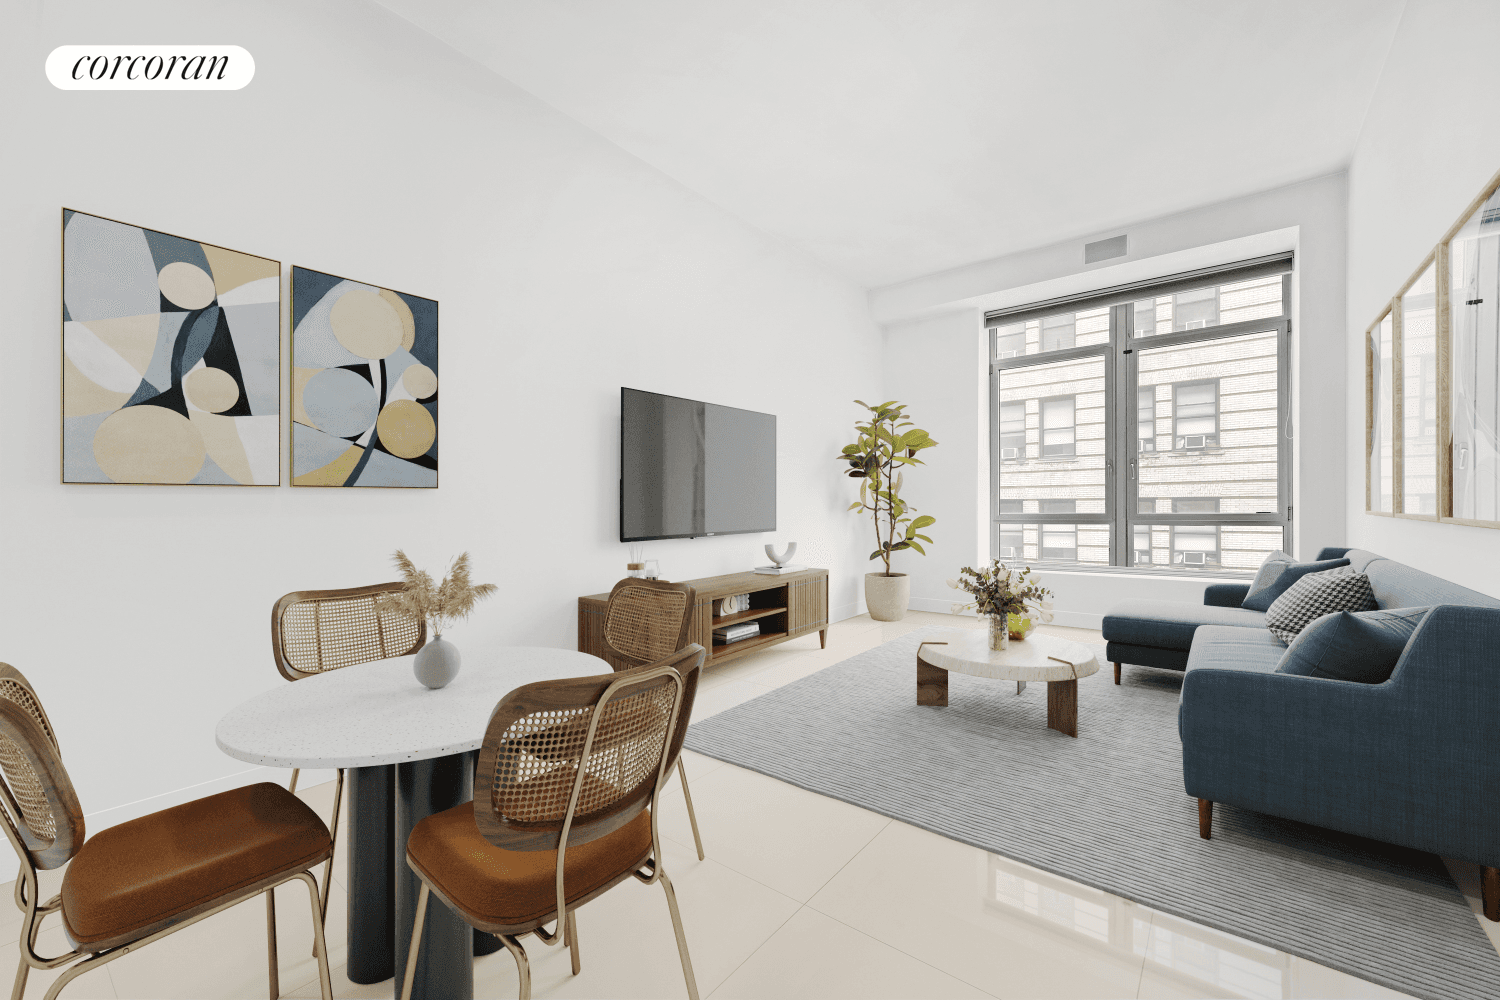 Lofty Aspirations ! This modern and spacious designer studio loft in the Financial District has a lot to offer with soaring 11 foot ceilings, large open living space with room ...